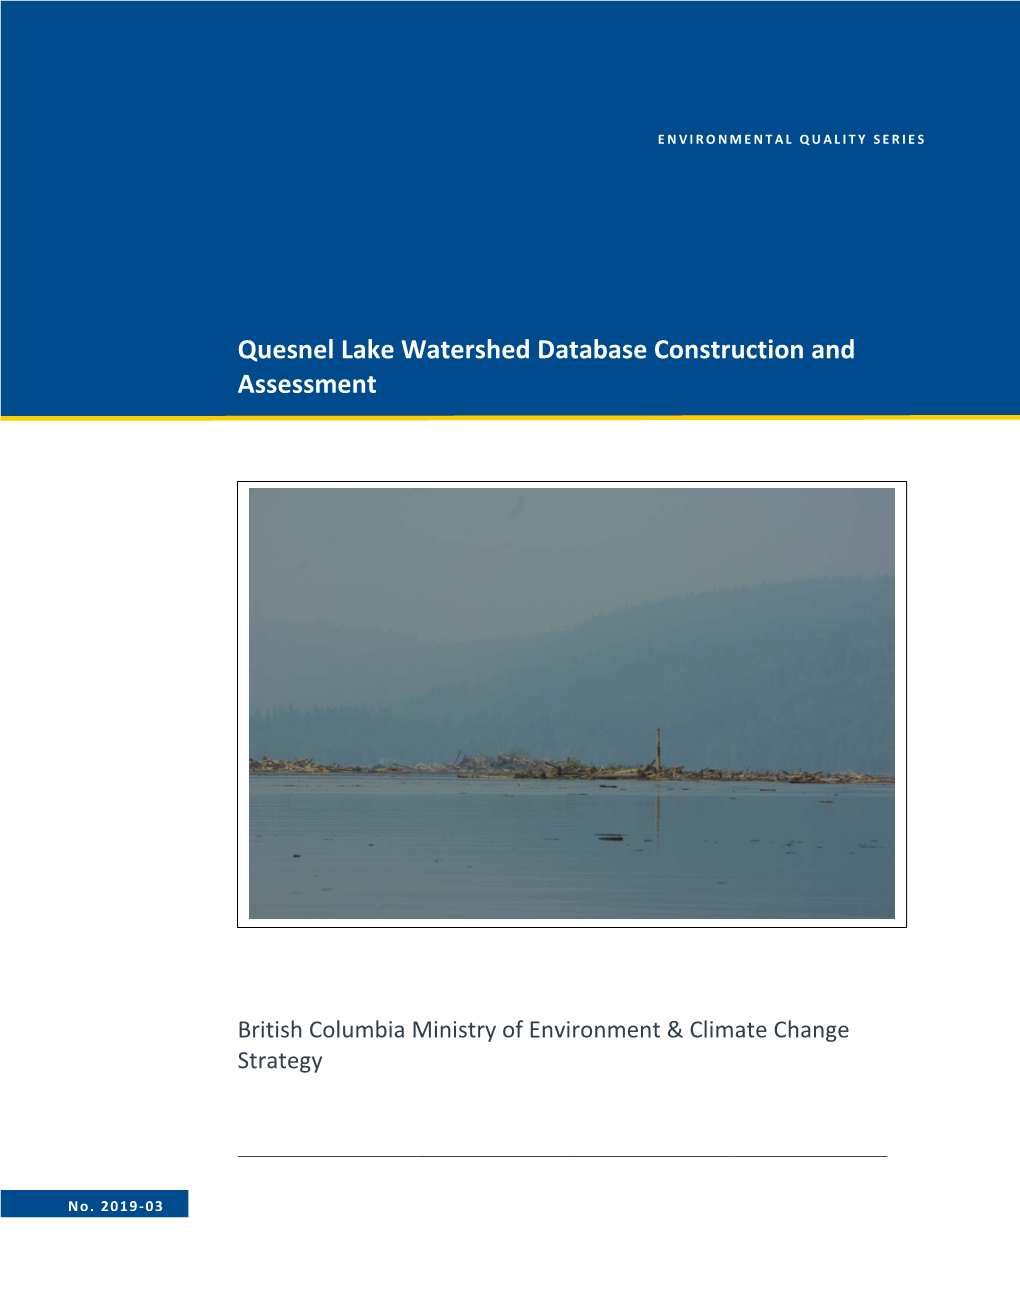 Quesnel Lake Watershed Database Construction and Assessment